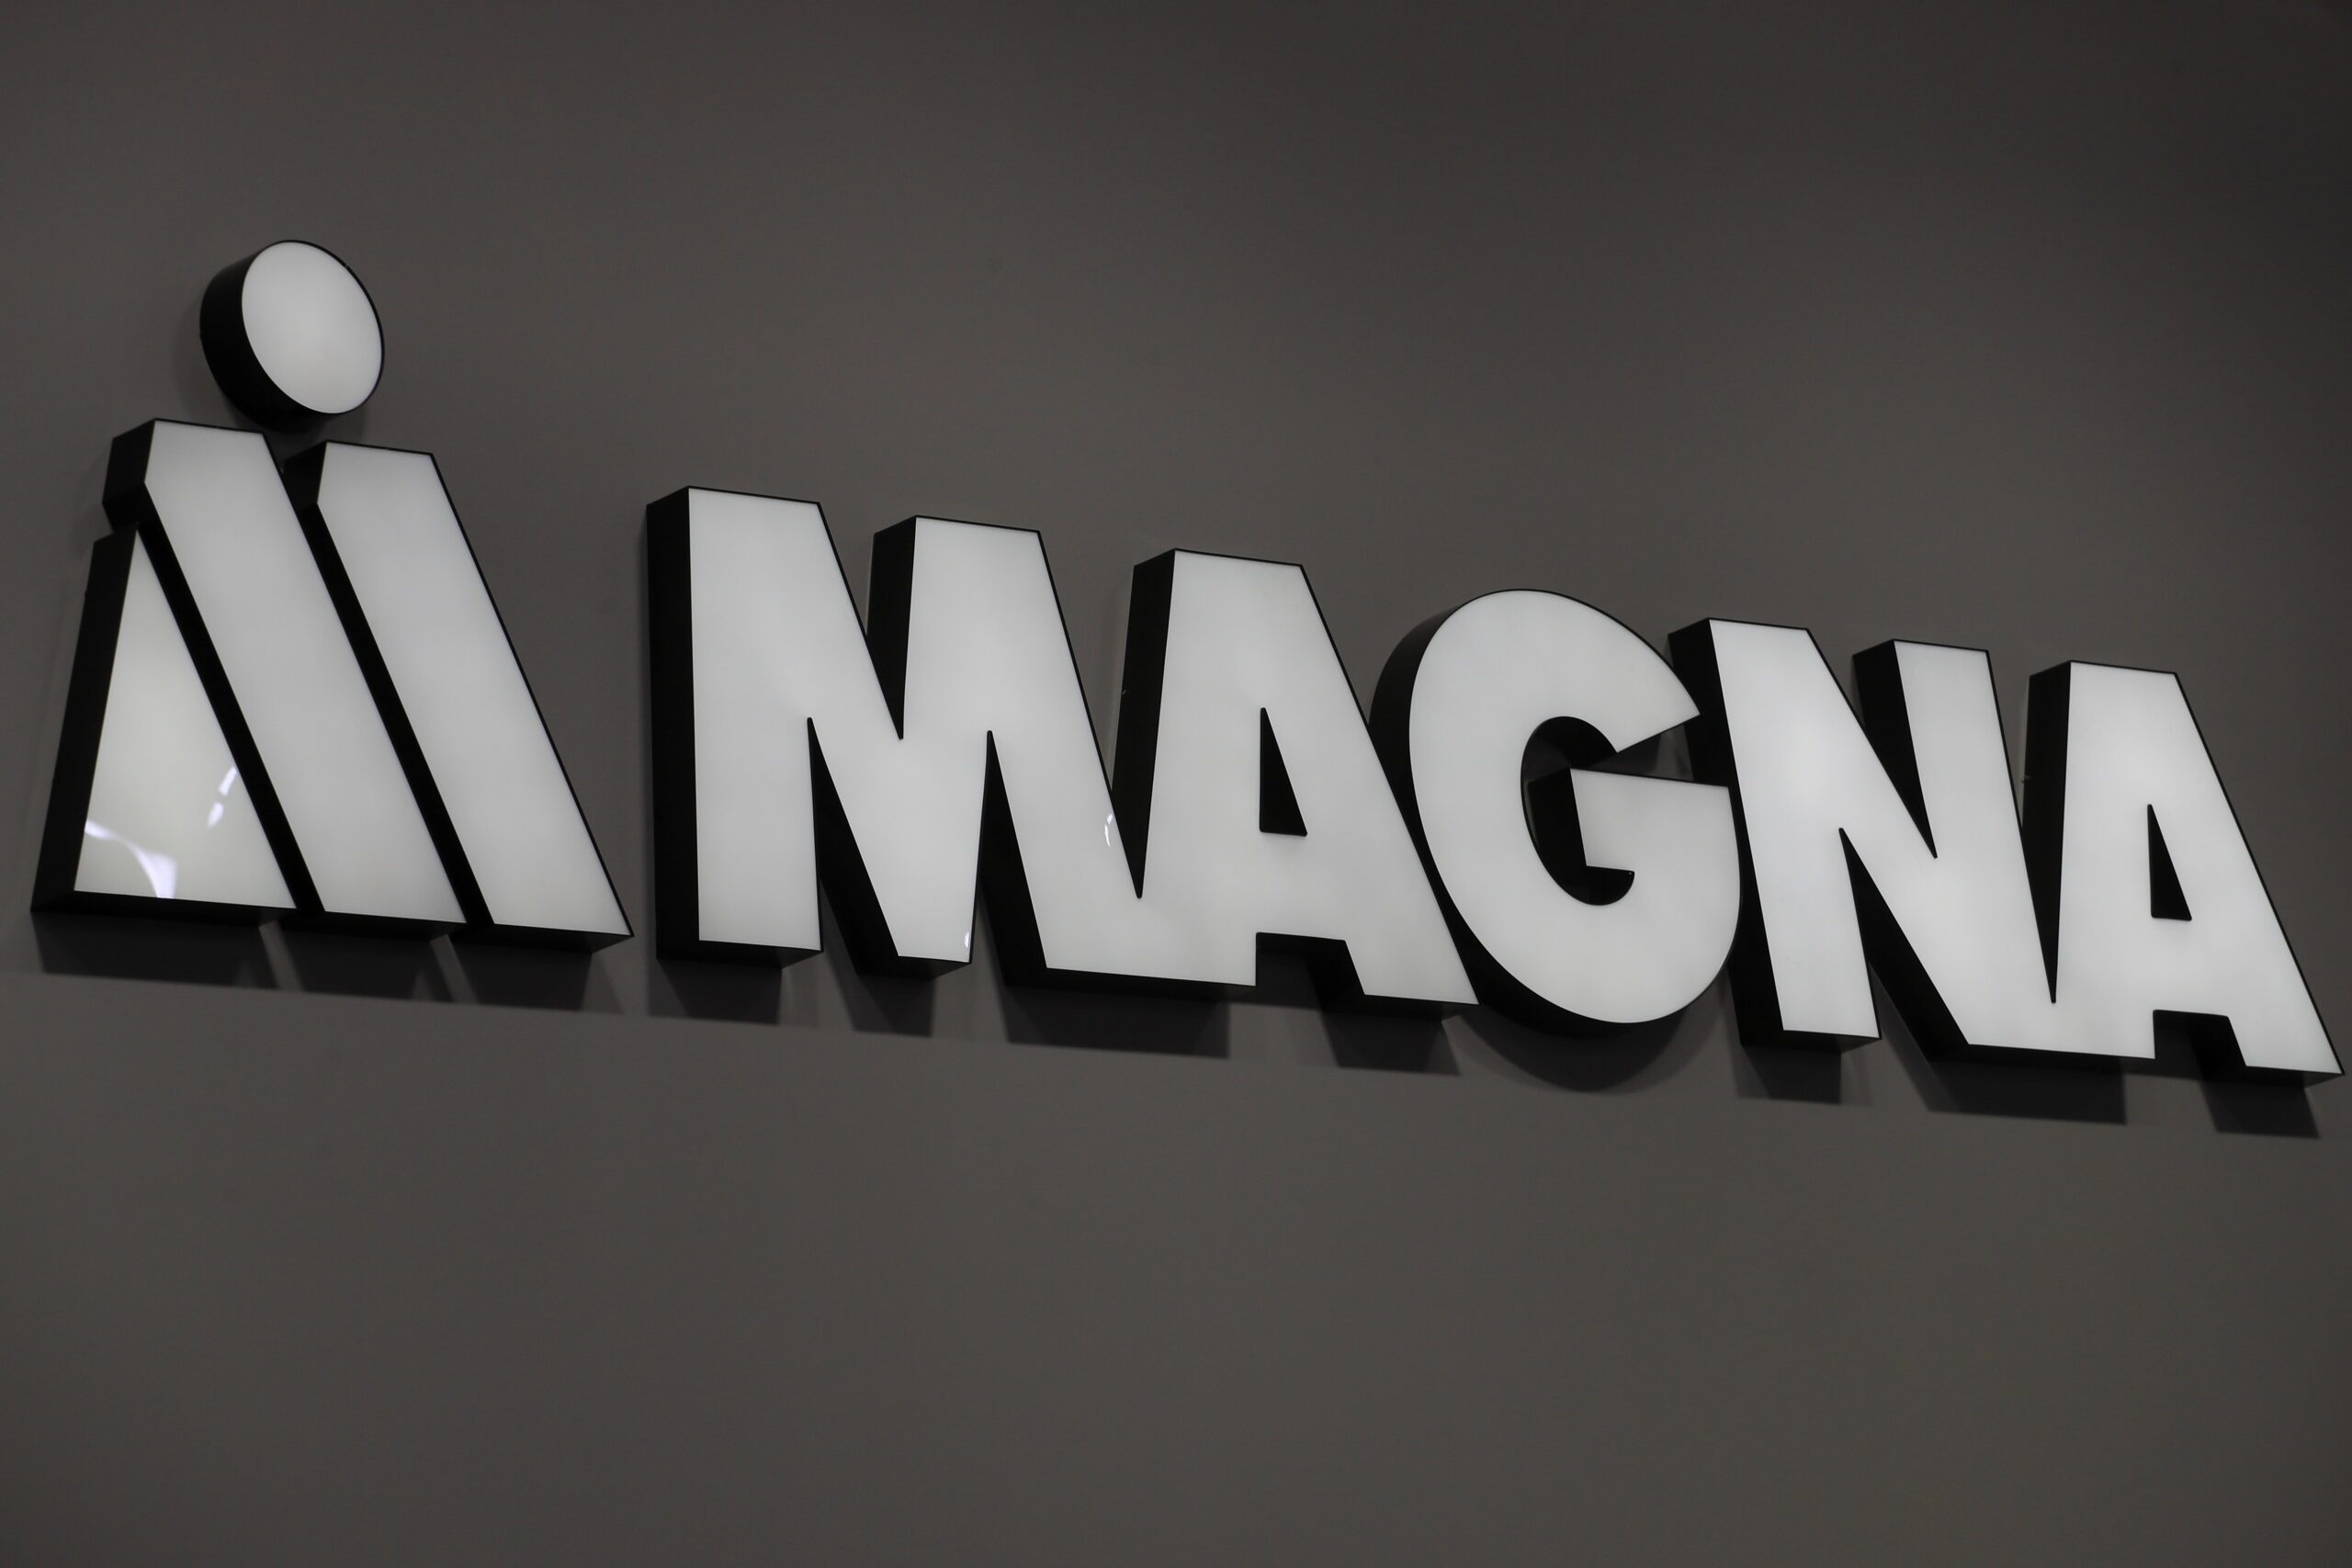 Magna logo photo taken during Munich Auto Show, IAA Mobility 2021 in Munich, Germany, September 8, 2021. REUTERS/Wolfgang Rattay